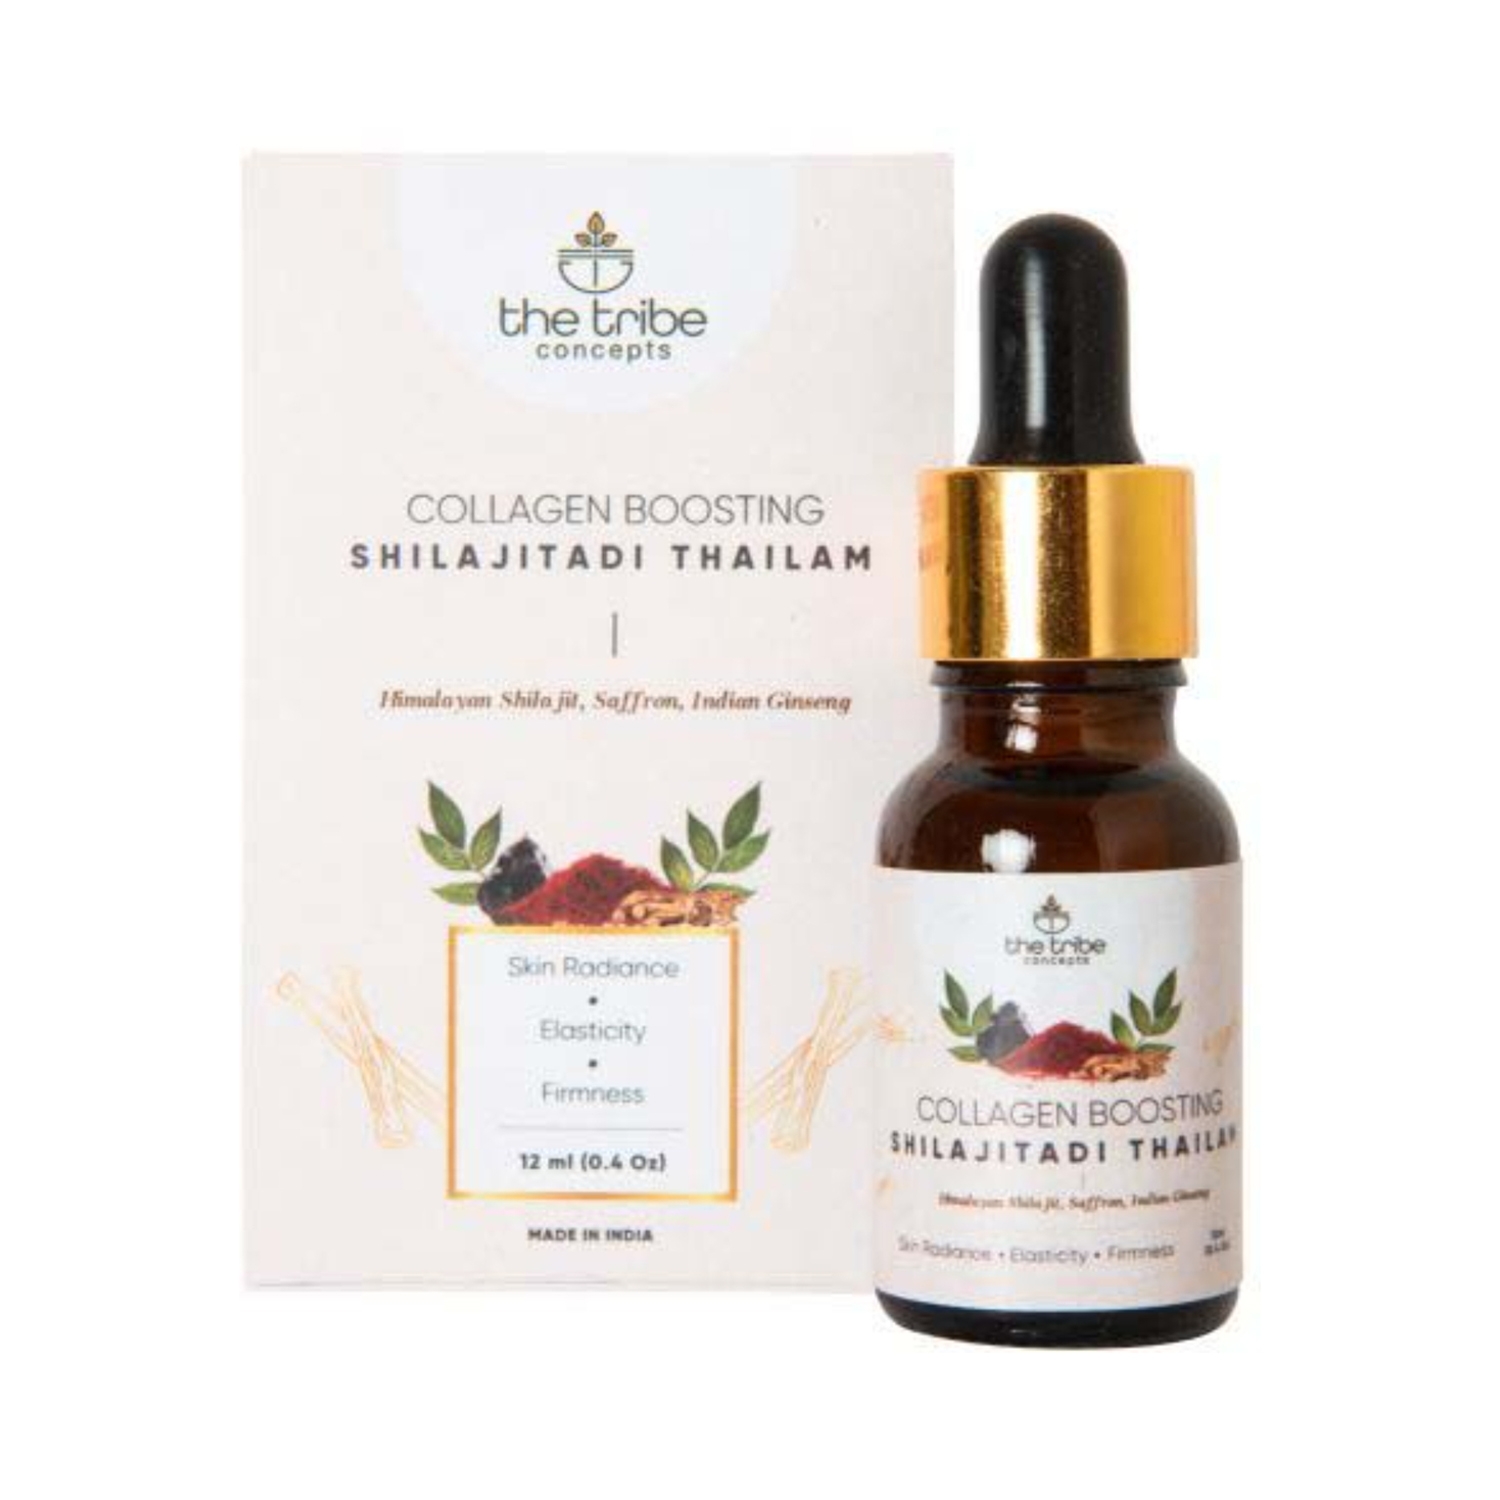 The Tribe Concepts | The Tribe Concepts Collagen Boosting Shilajitadi Thailam Face Oil (12ml)